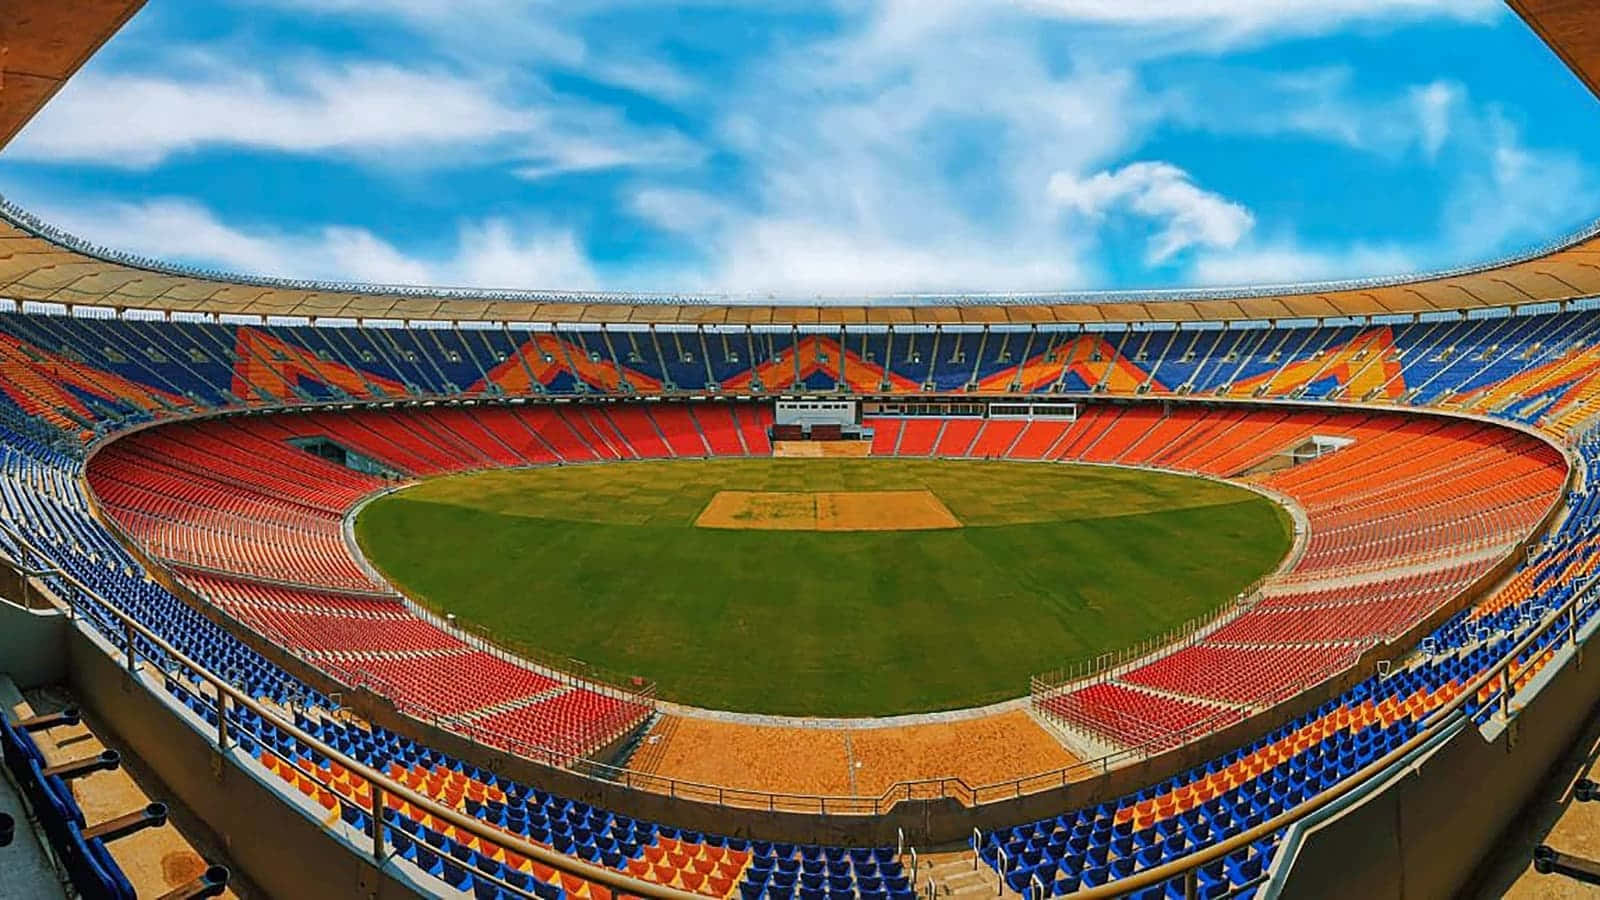 A Stadium With Blue And Orange Seats